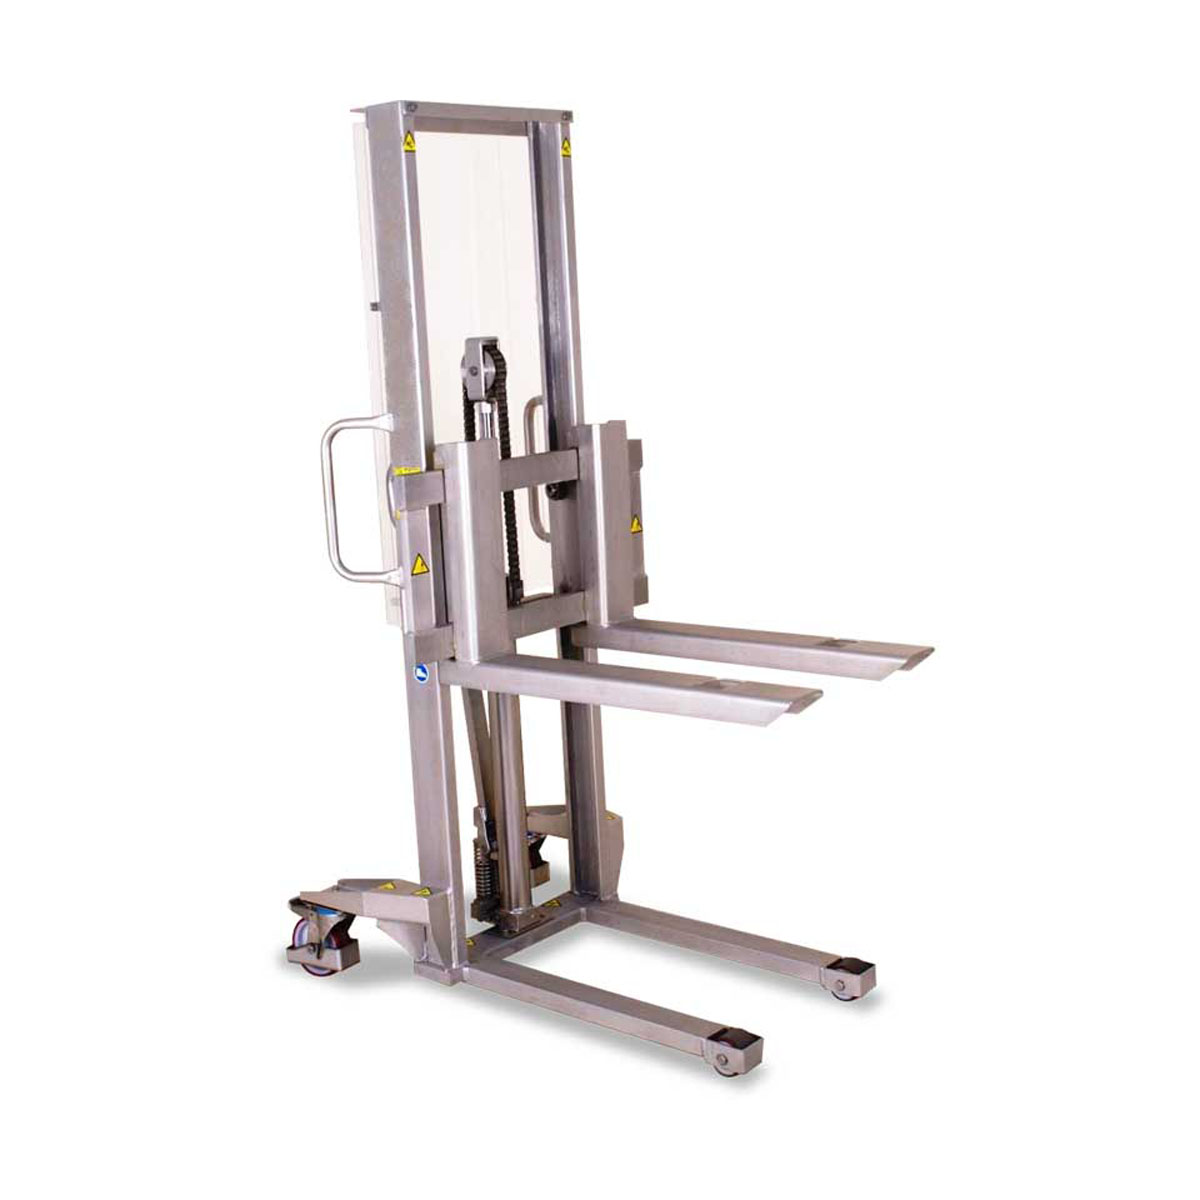 Buy Pallet Stacker (Stainless Steel) available at Astrolift NZ